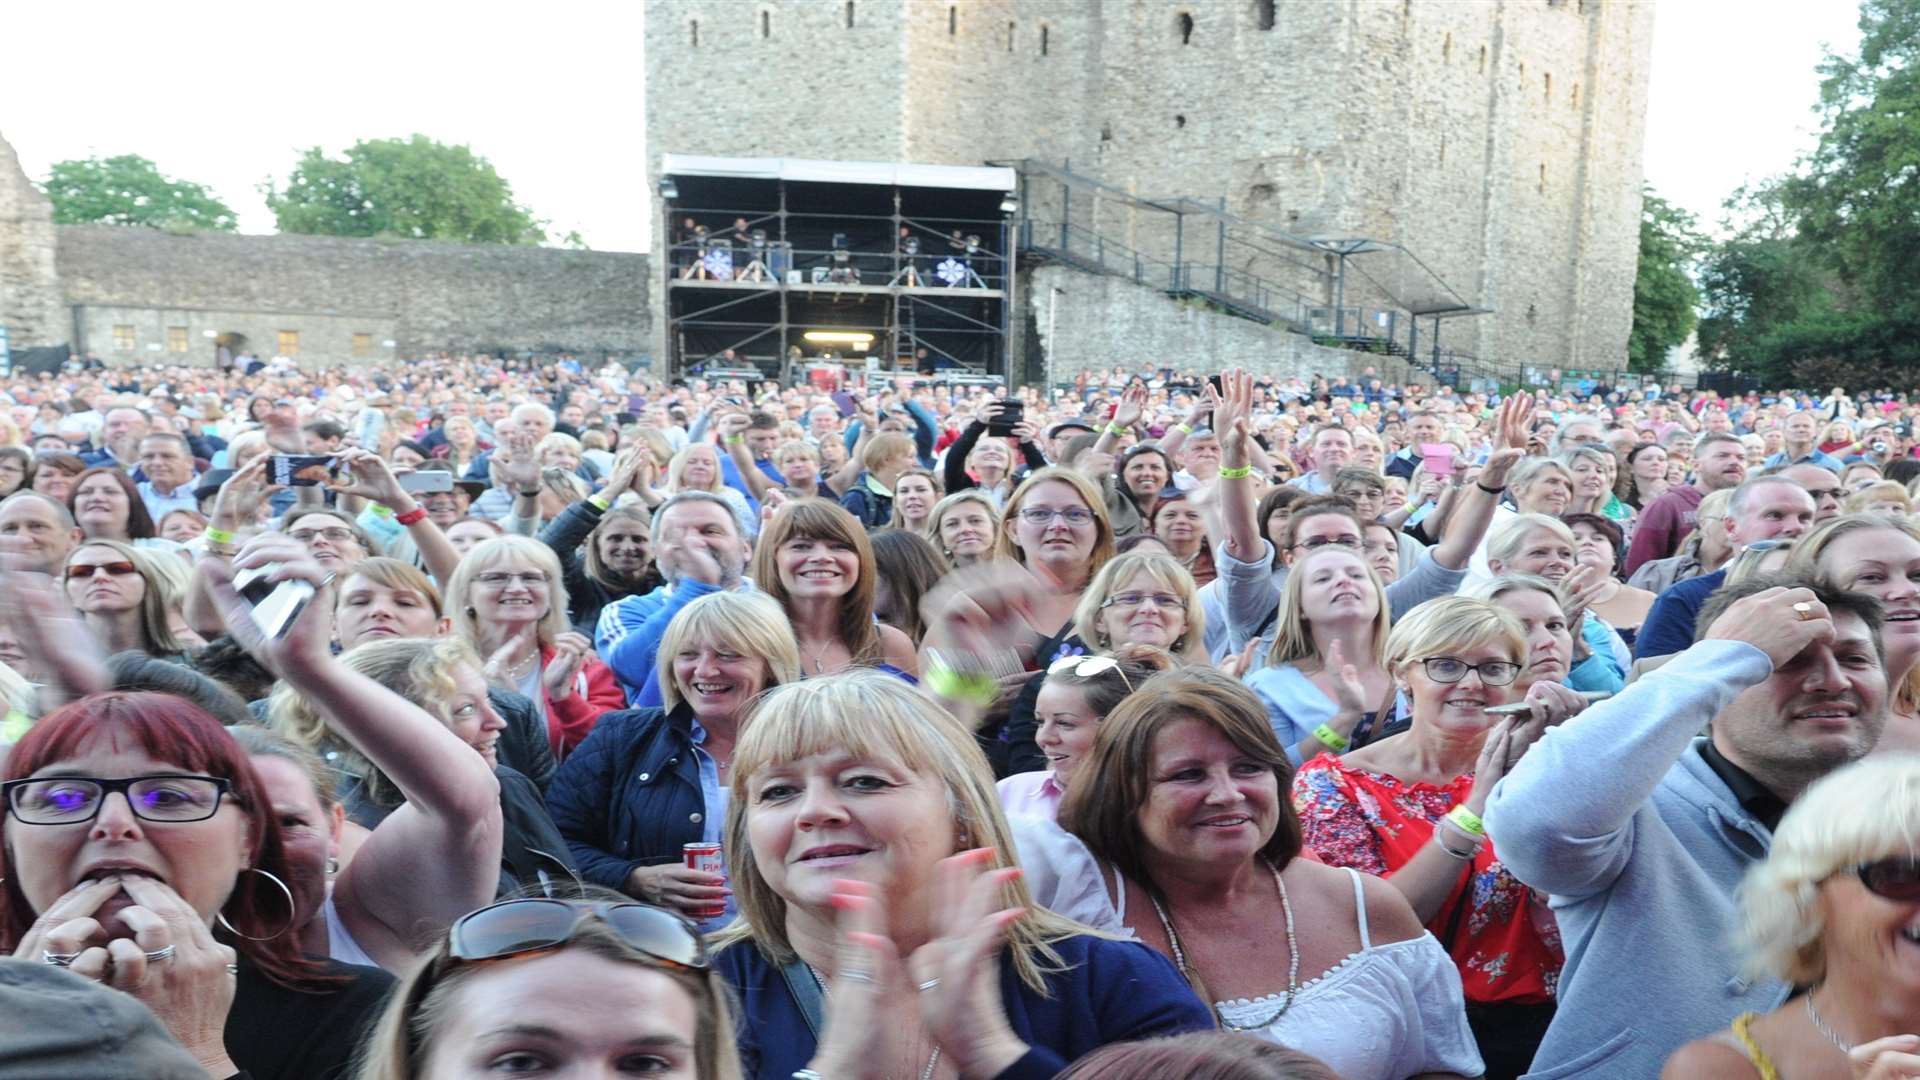 The crowds at Rochester Castle last year. Credit: Steve Crispe